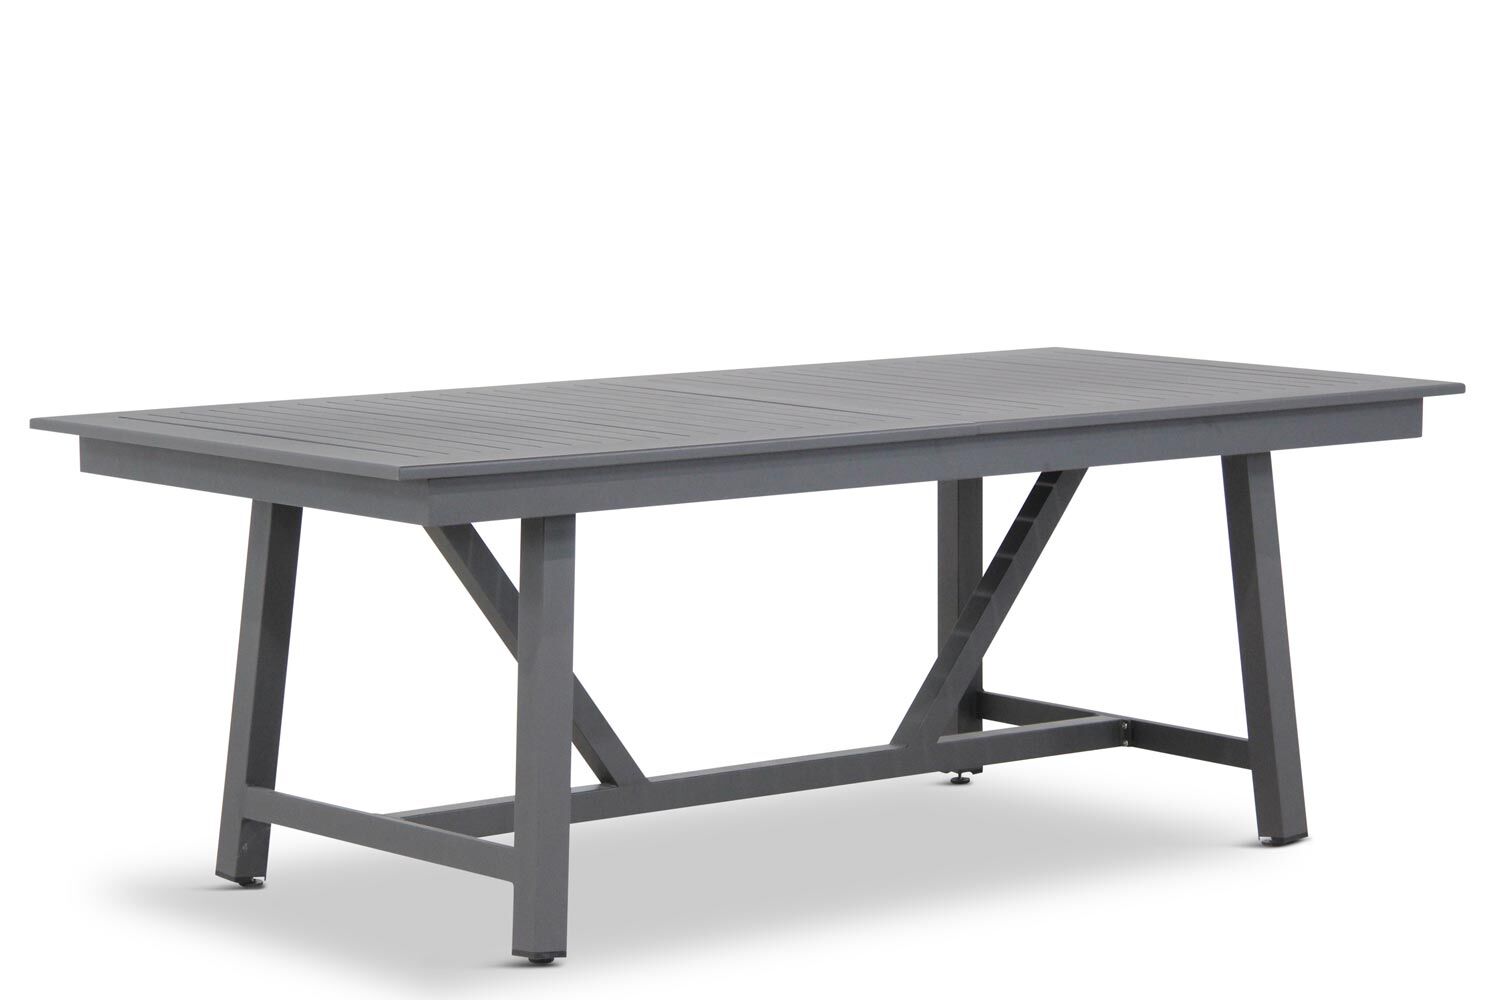 Lifestyle Dolphin/General 217/277 cm dining tuinset 7-delig